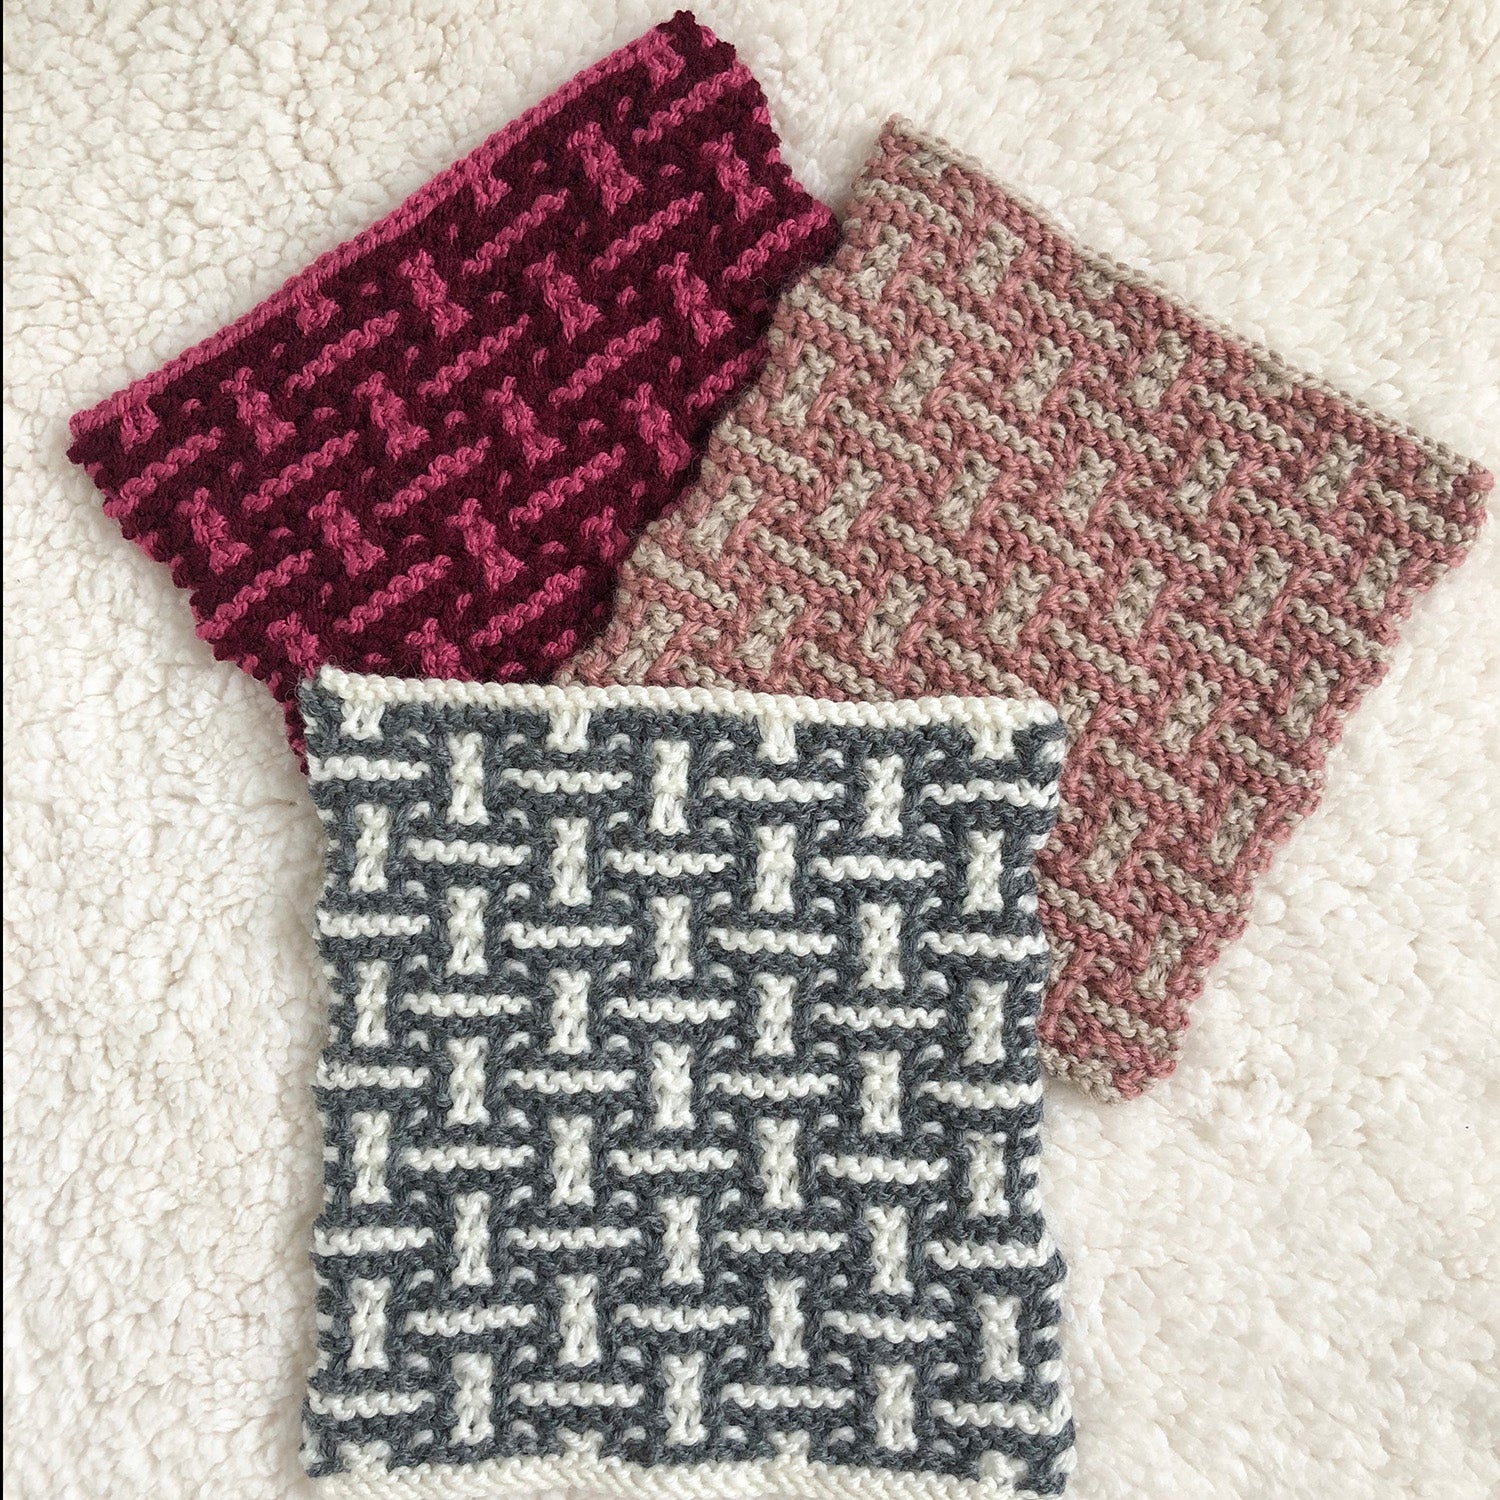 Week 2 New Lane - A Day Out Knit Along Blanket by Sarah Hatton - How to knit mosaic stitch